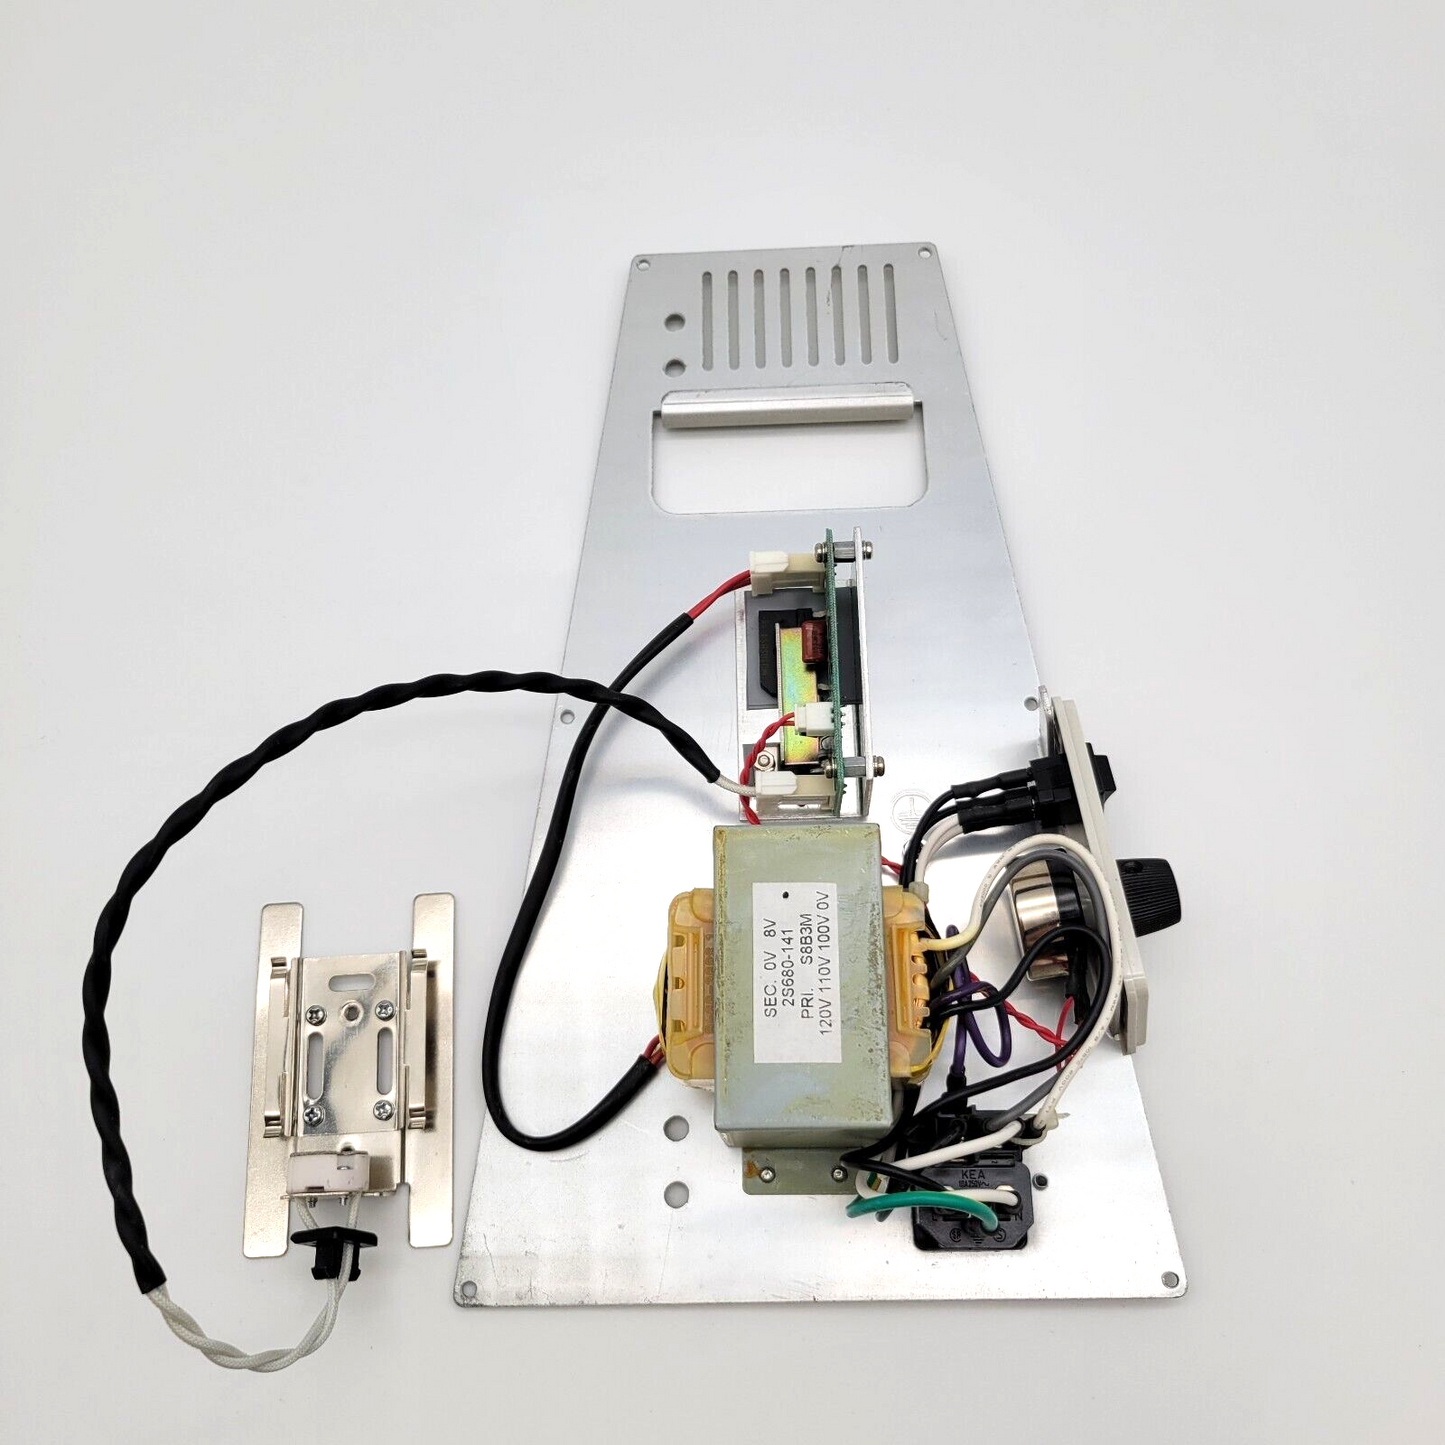 Nikon Microscope E200 Power Supply Lamp, Switch and Rheostat Replacement - microscopemarketplace